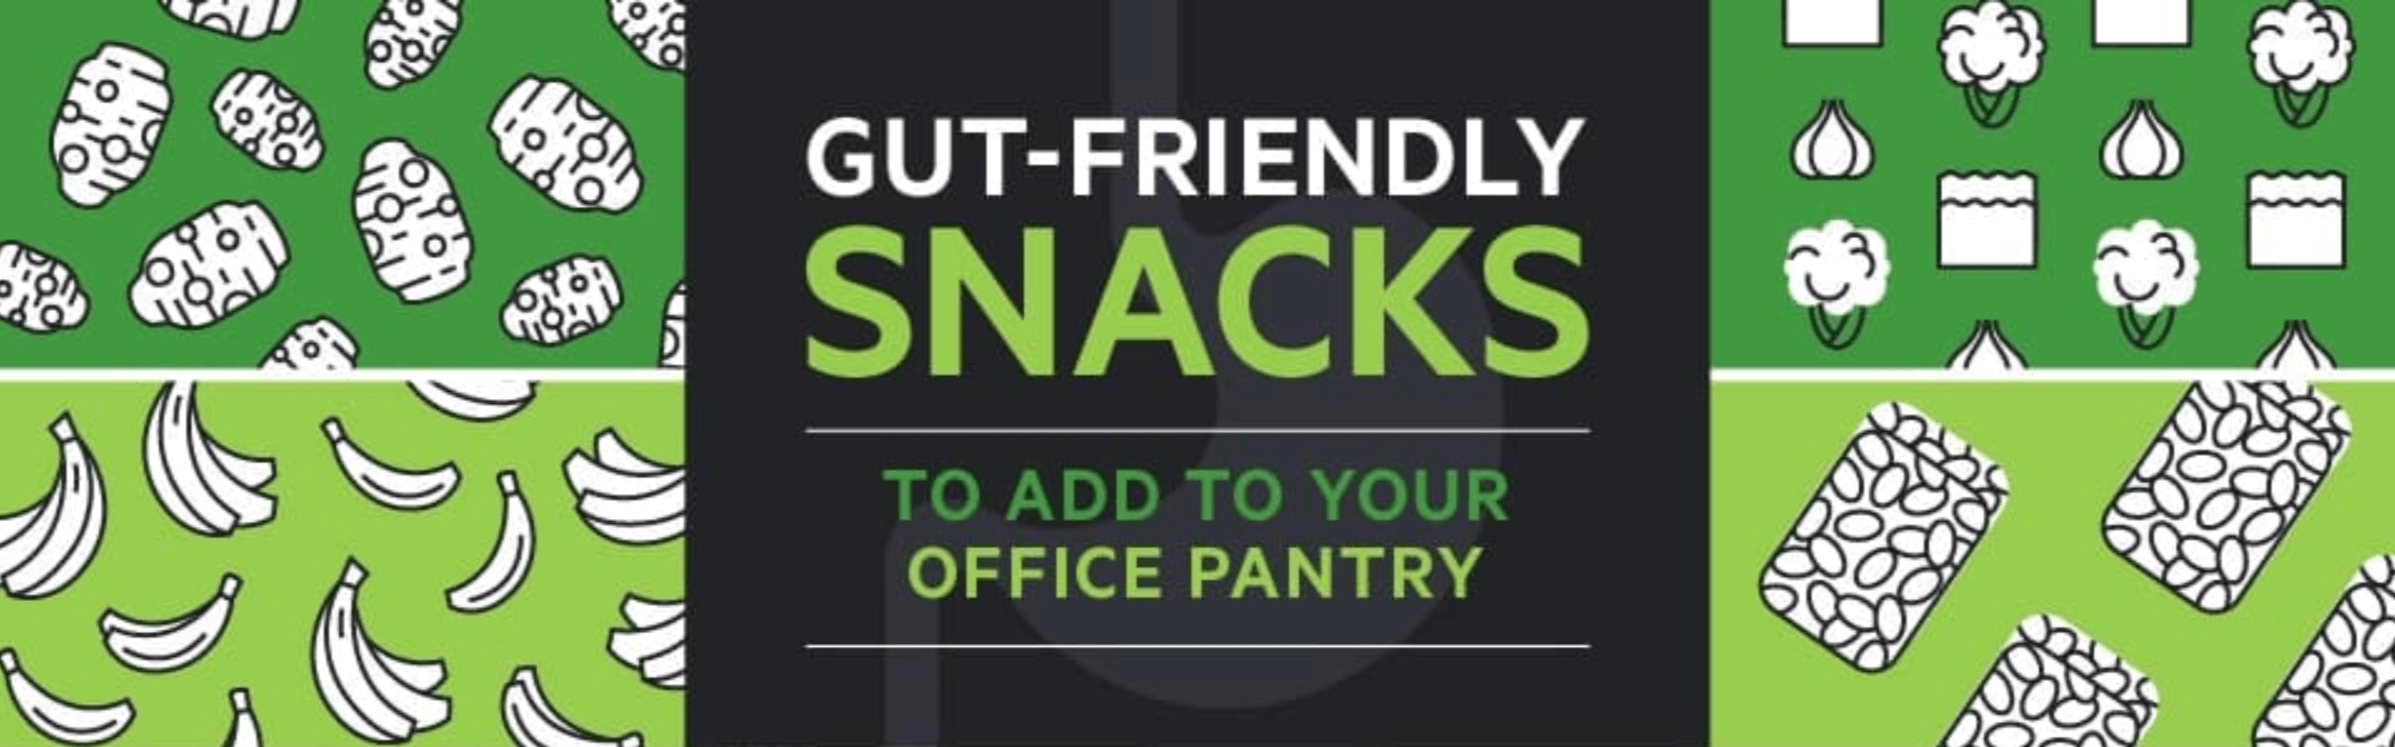 Gut-Friendly Snacks to Add to Your Pantry